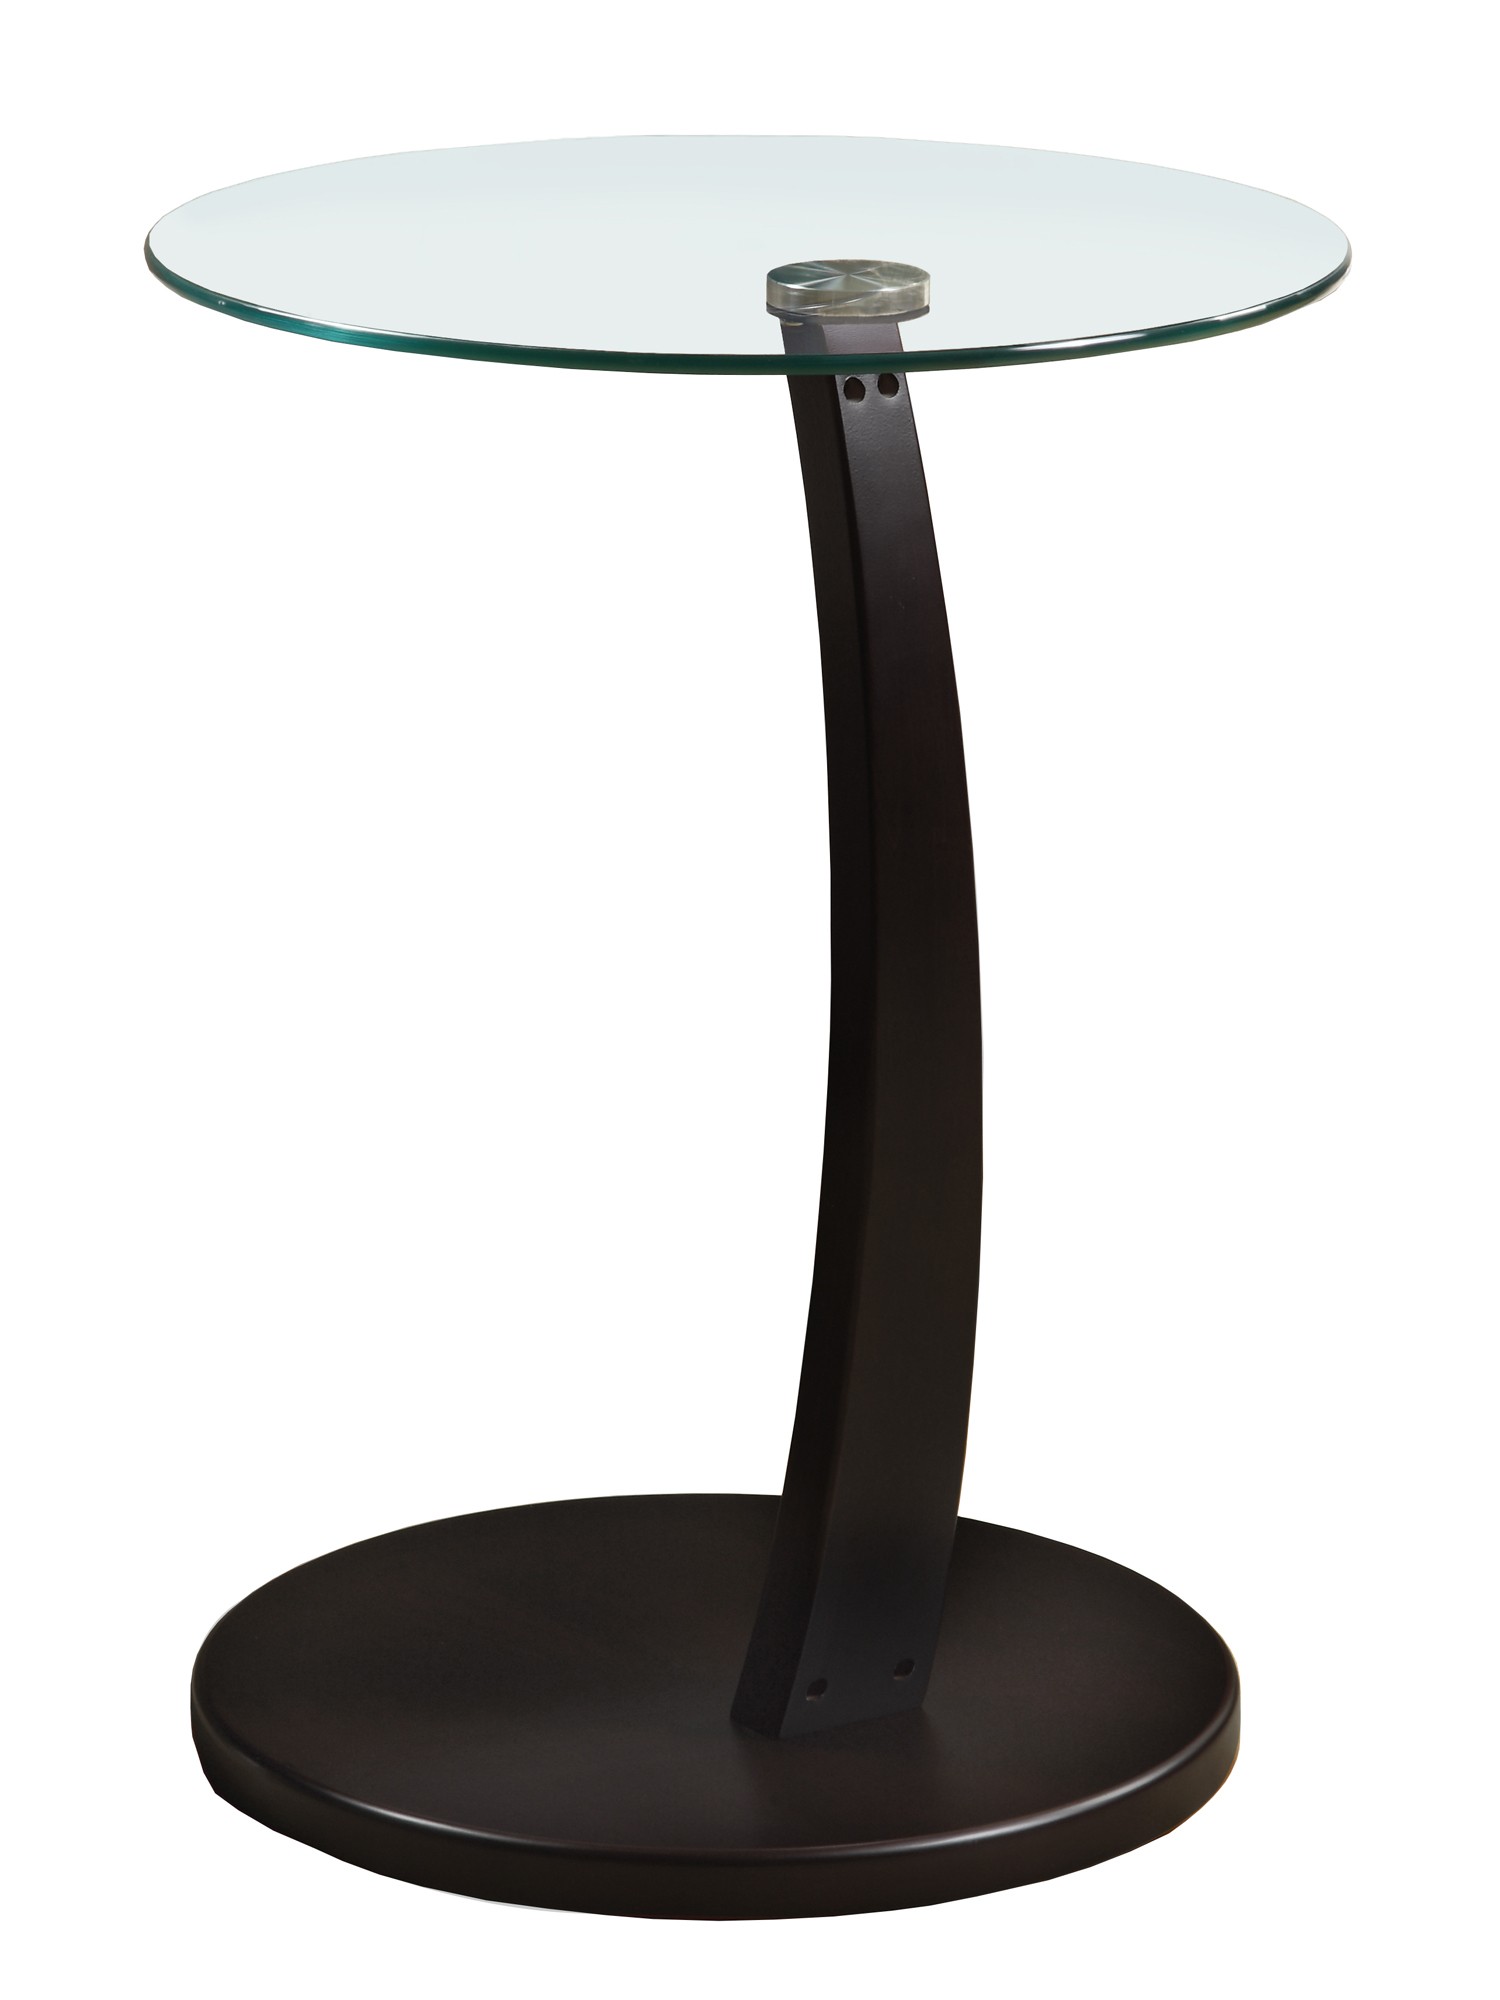 SIDE TABLE - CAPPUCCINO BENTWOOD WITH TEMPERED GLASS